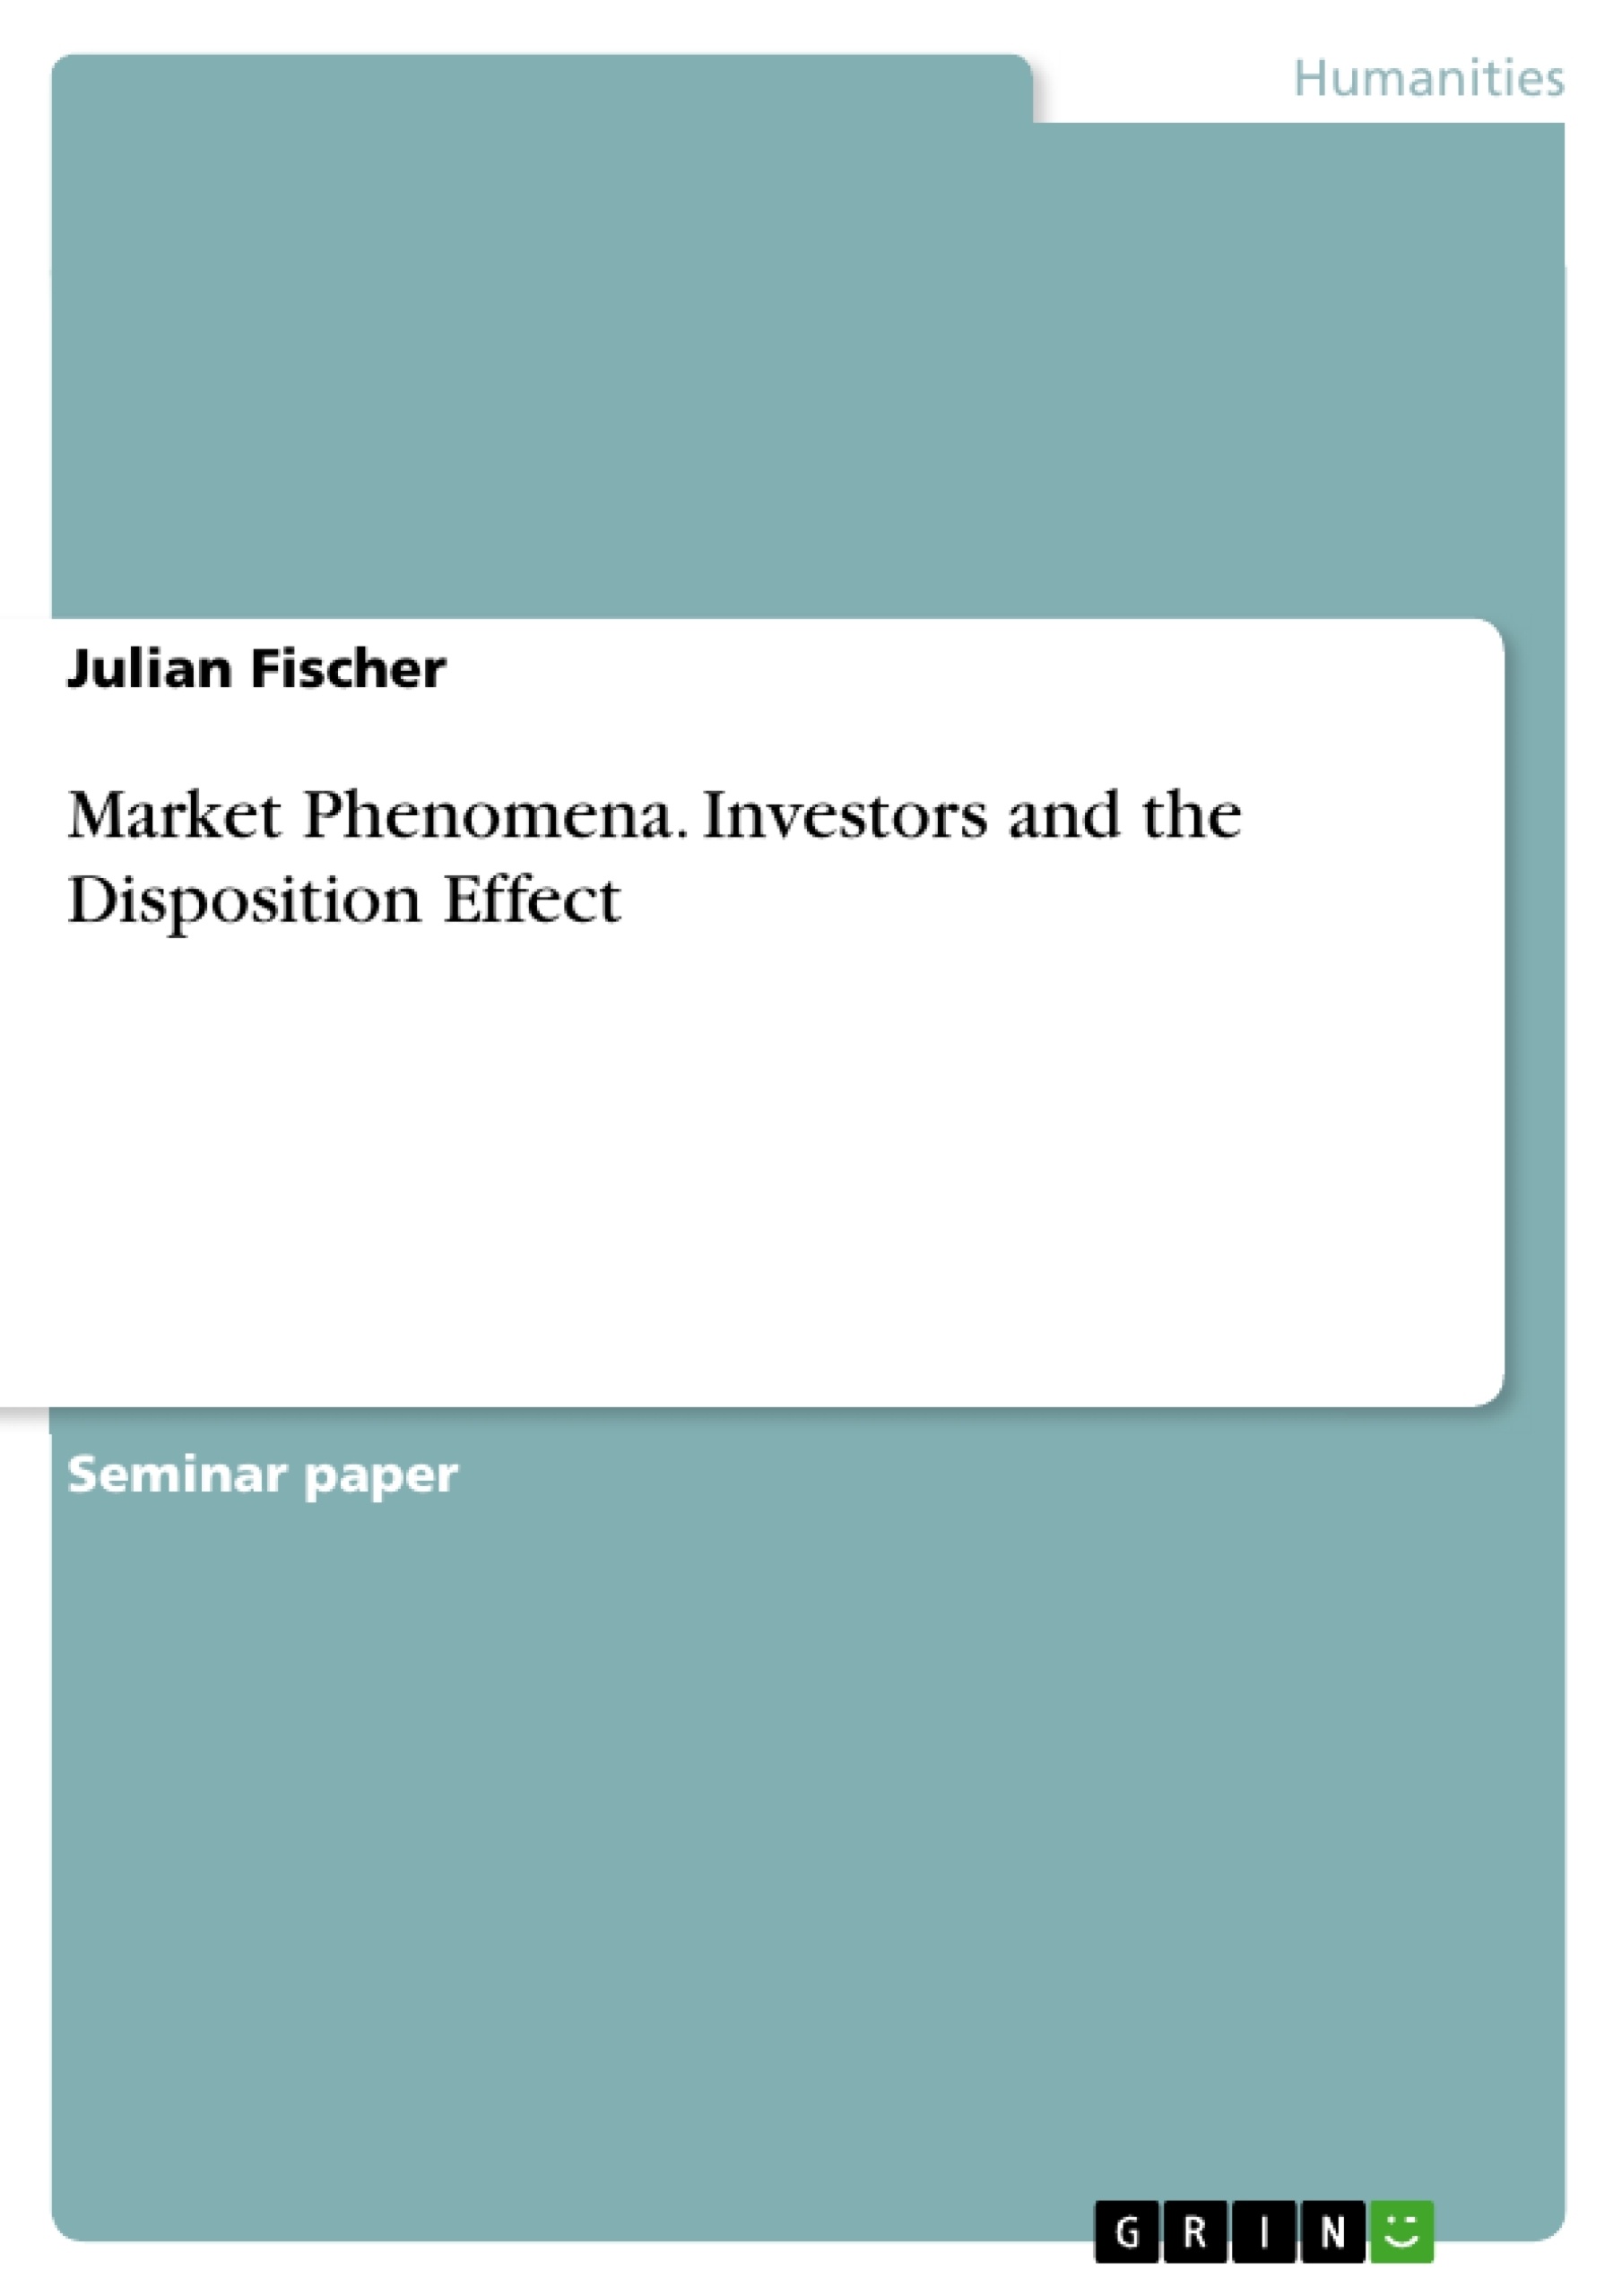 Title: Market Phenomena. Investors and the Disposition Effect